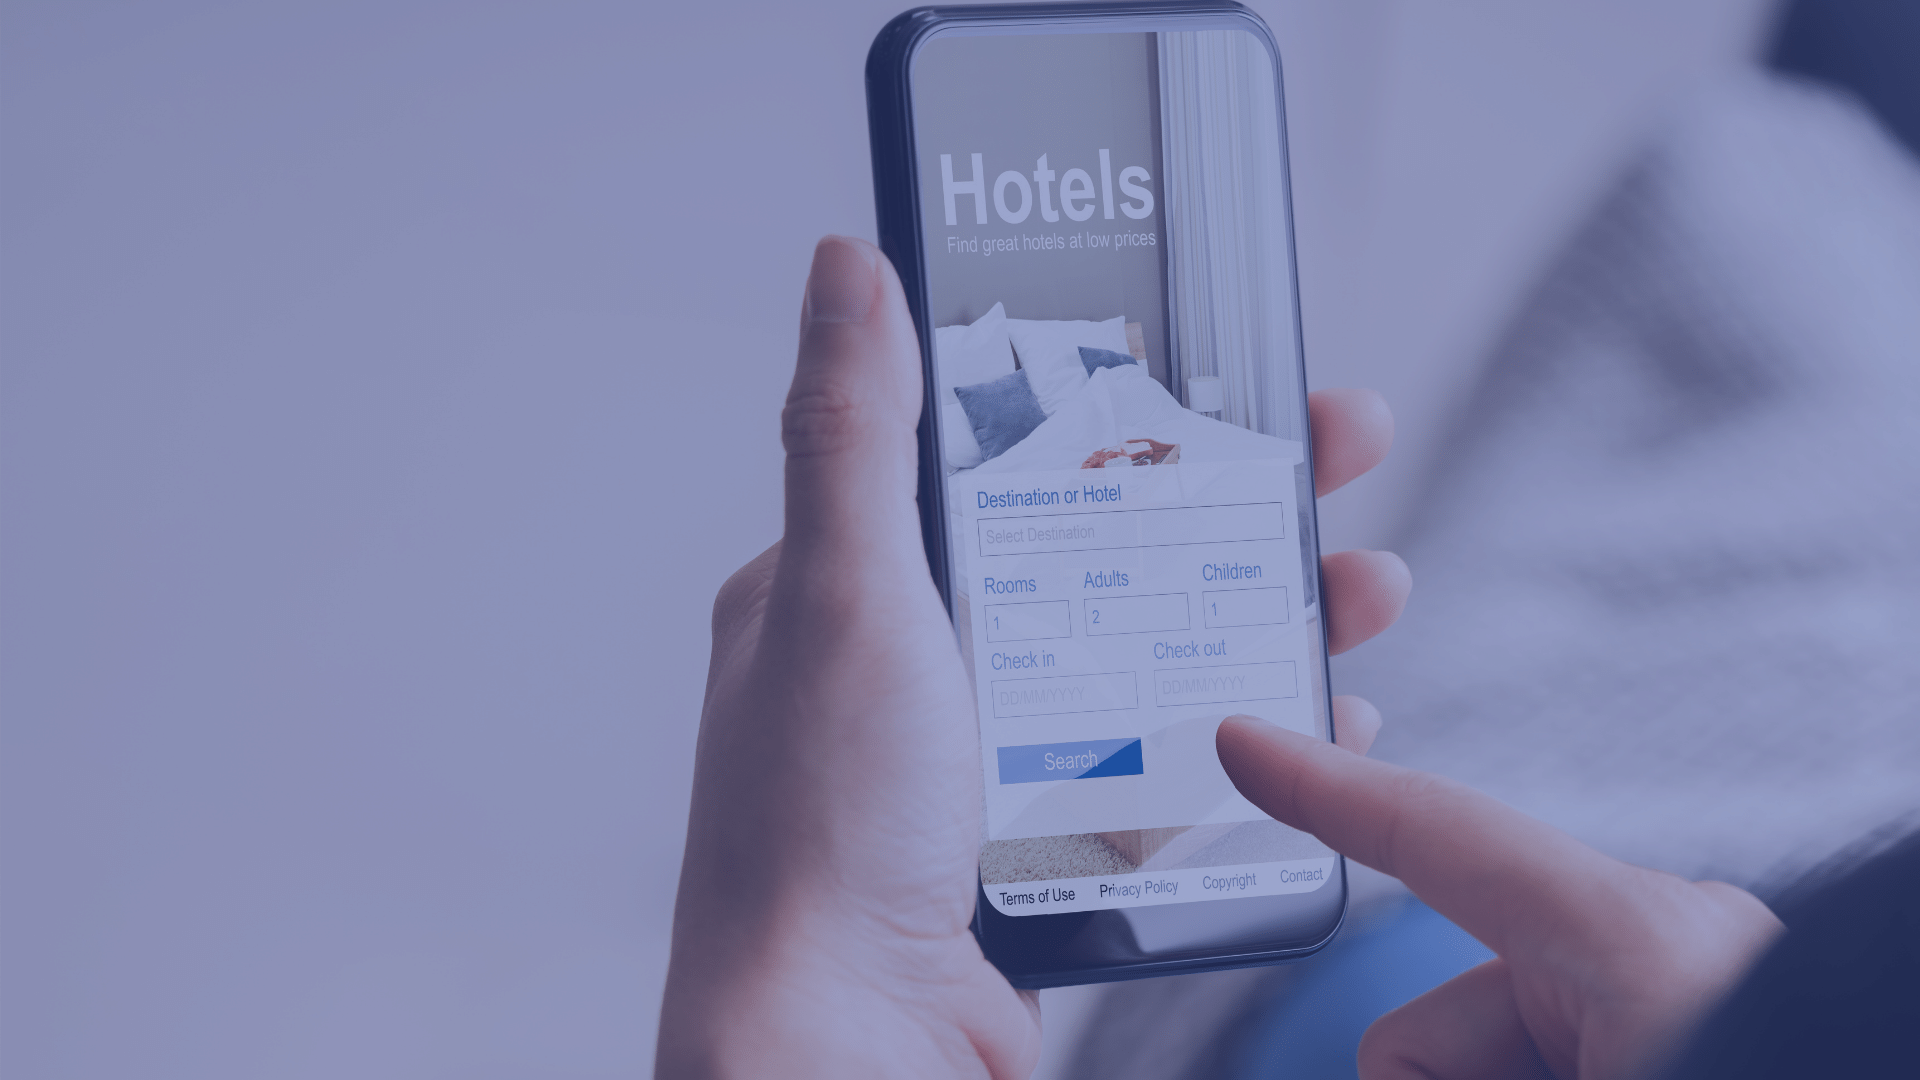 Video | IBE (Internet Booking Engines) & Direct Distribution in Hospitality